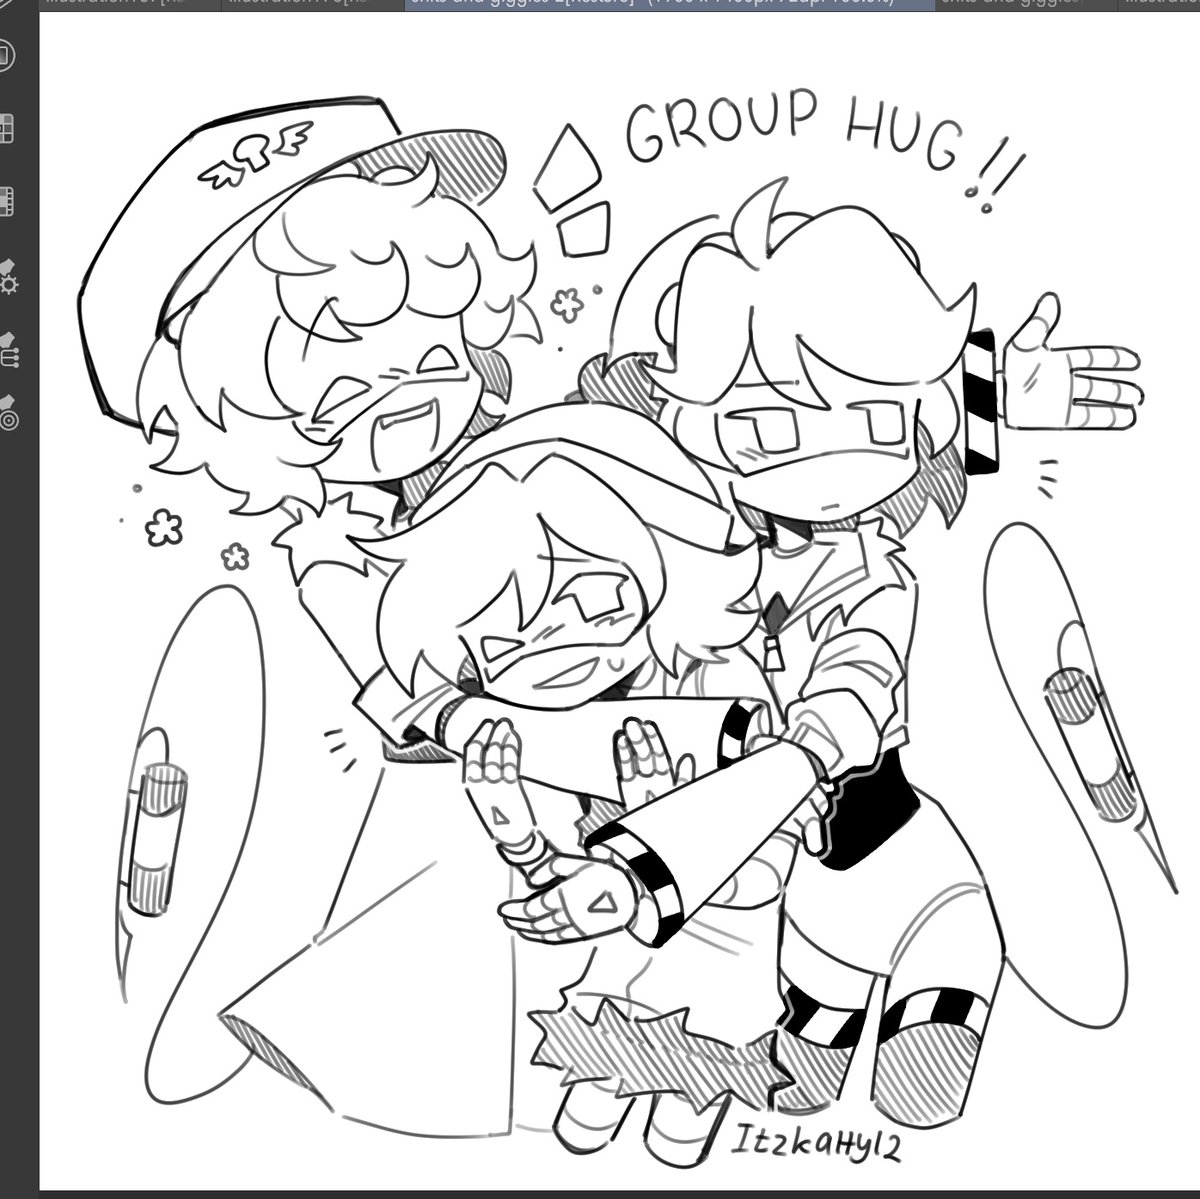 Group hug! 🫂 🫂 #murderdrones (redraw! Only if you remember!)